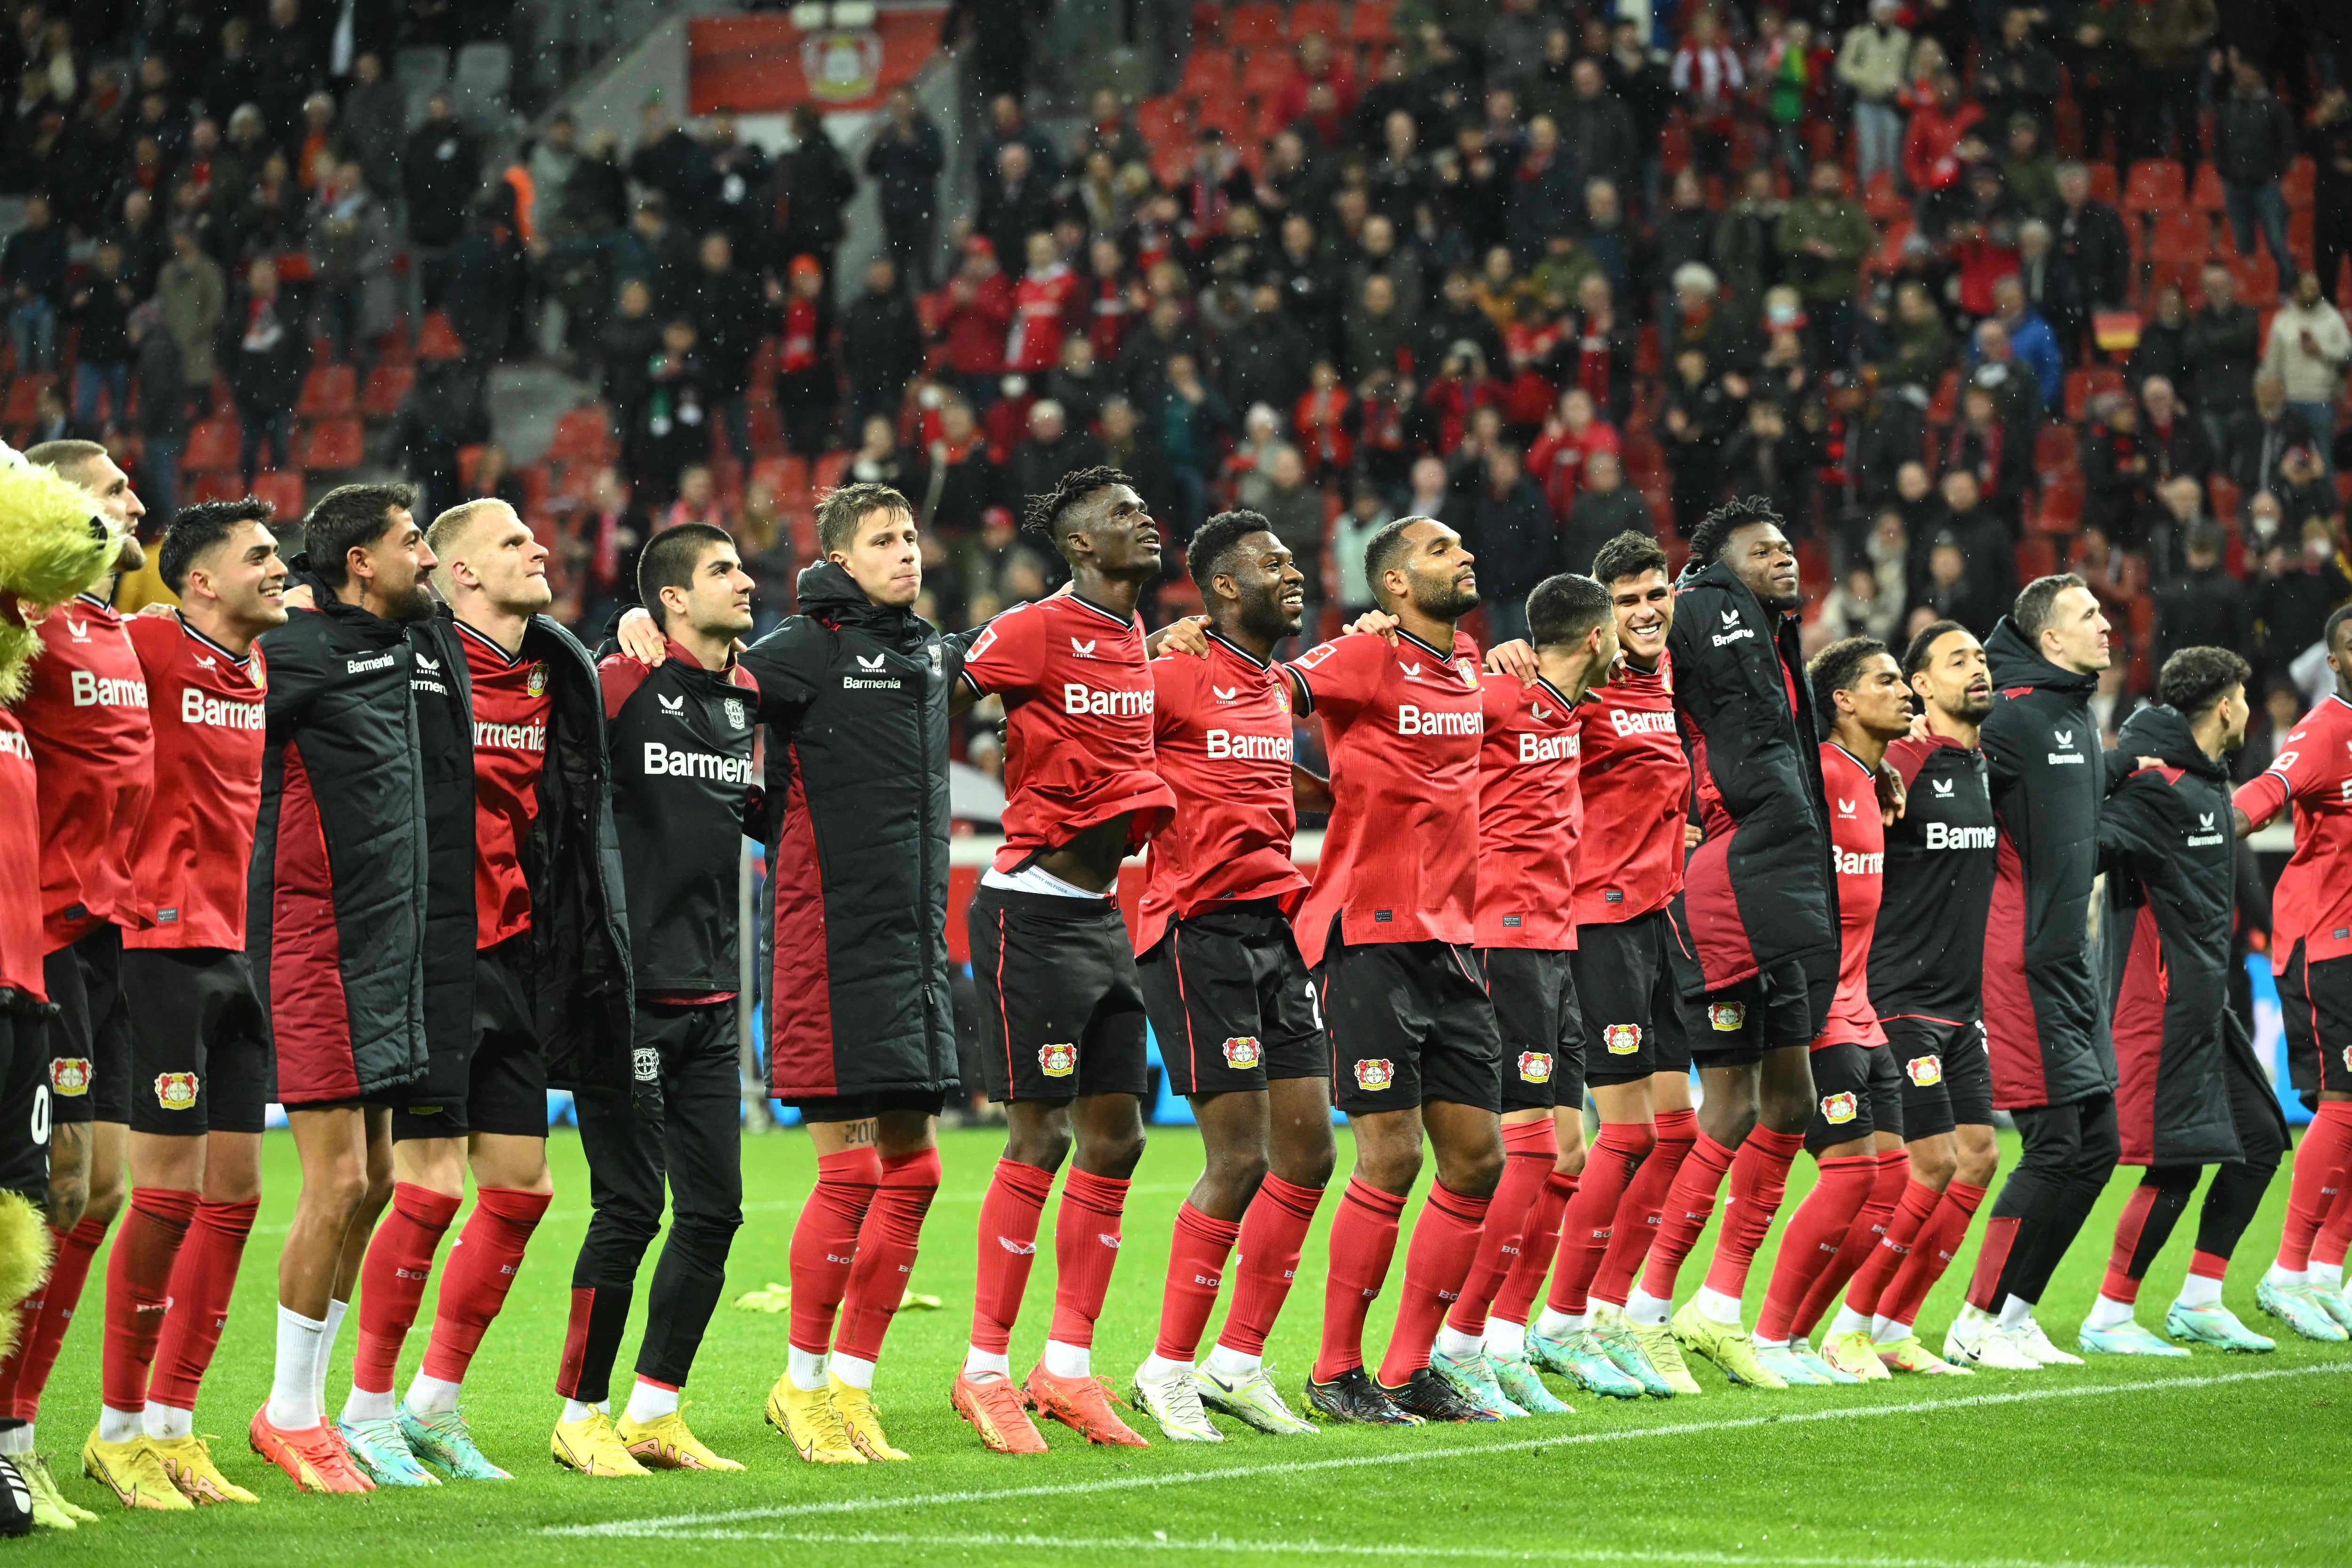 Leverkusen's players celebrate after winning the German first division Bundesliga football match  Bayer Leverkusen v Union Berlin in Leverkusen, western Germany on November 6, 2022. (Photo by INA FASSBENDER / AFP) / DFL REGULATIONS PROHIBIT ANY USE OF PHOTOGRAPHS AS IMAGE SEQUENCES AND/OR QUASI-VIDEO